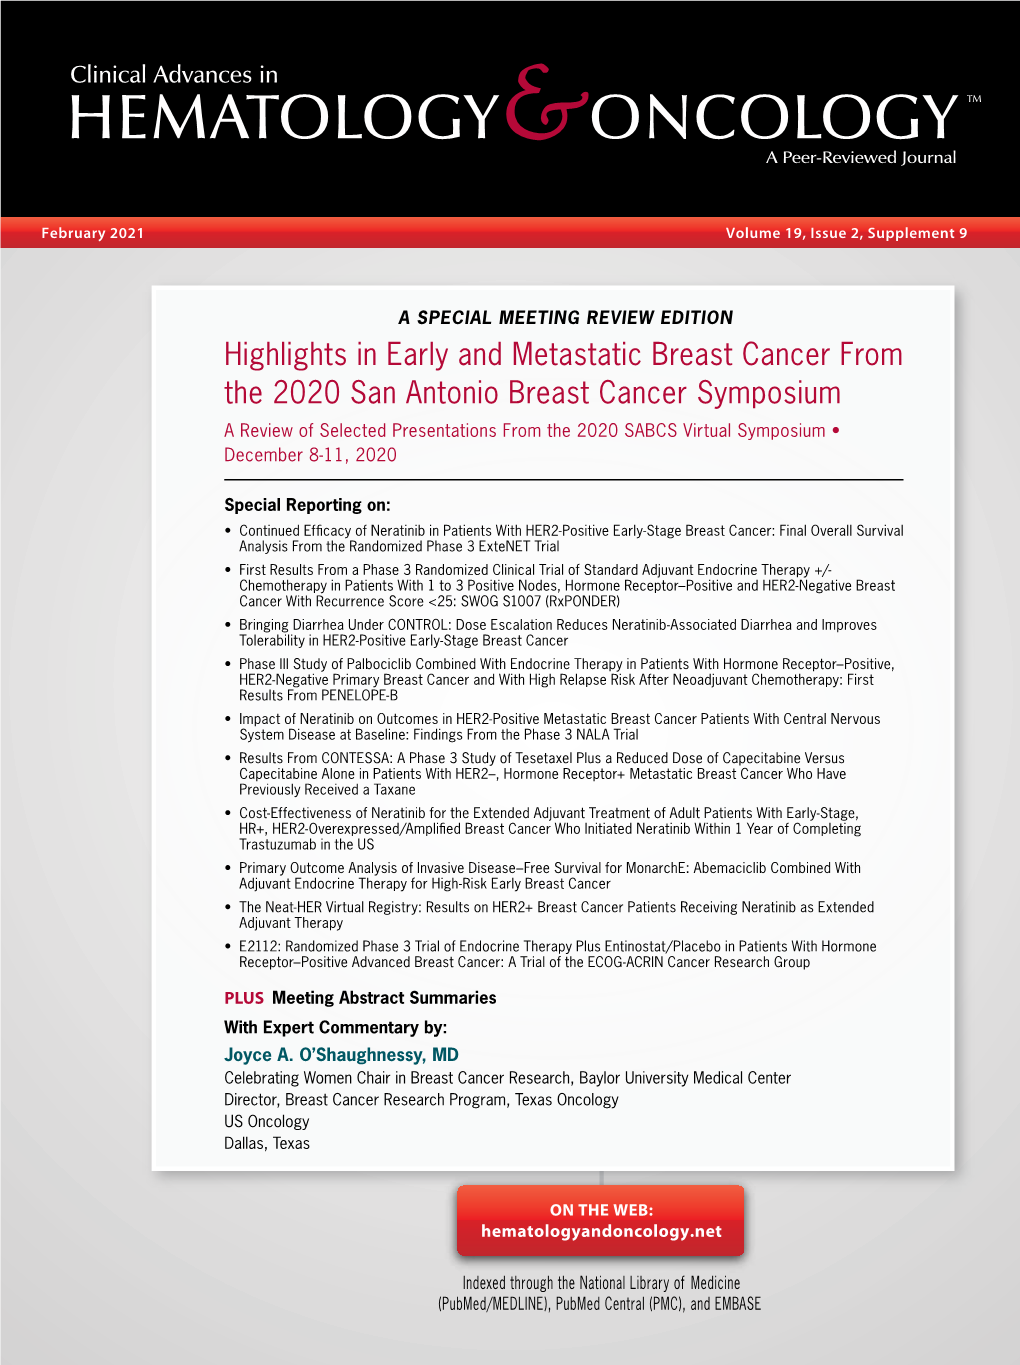 Highlights in Early and Metastatic Breast Cancer from the 2020 San